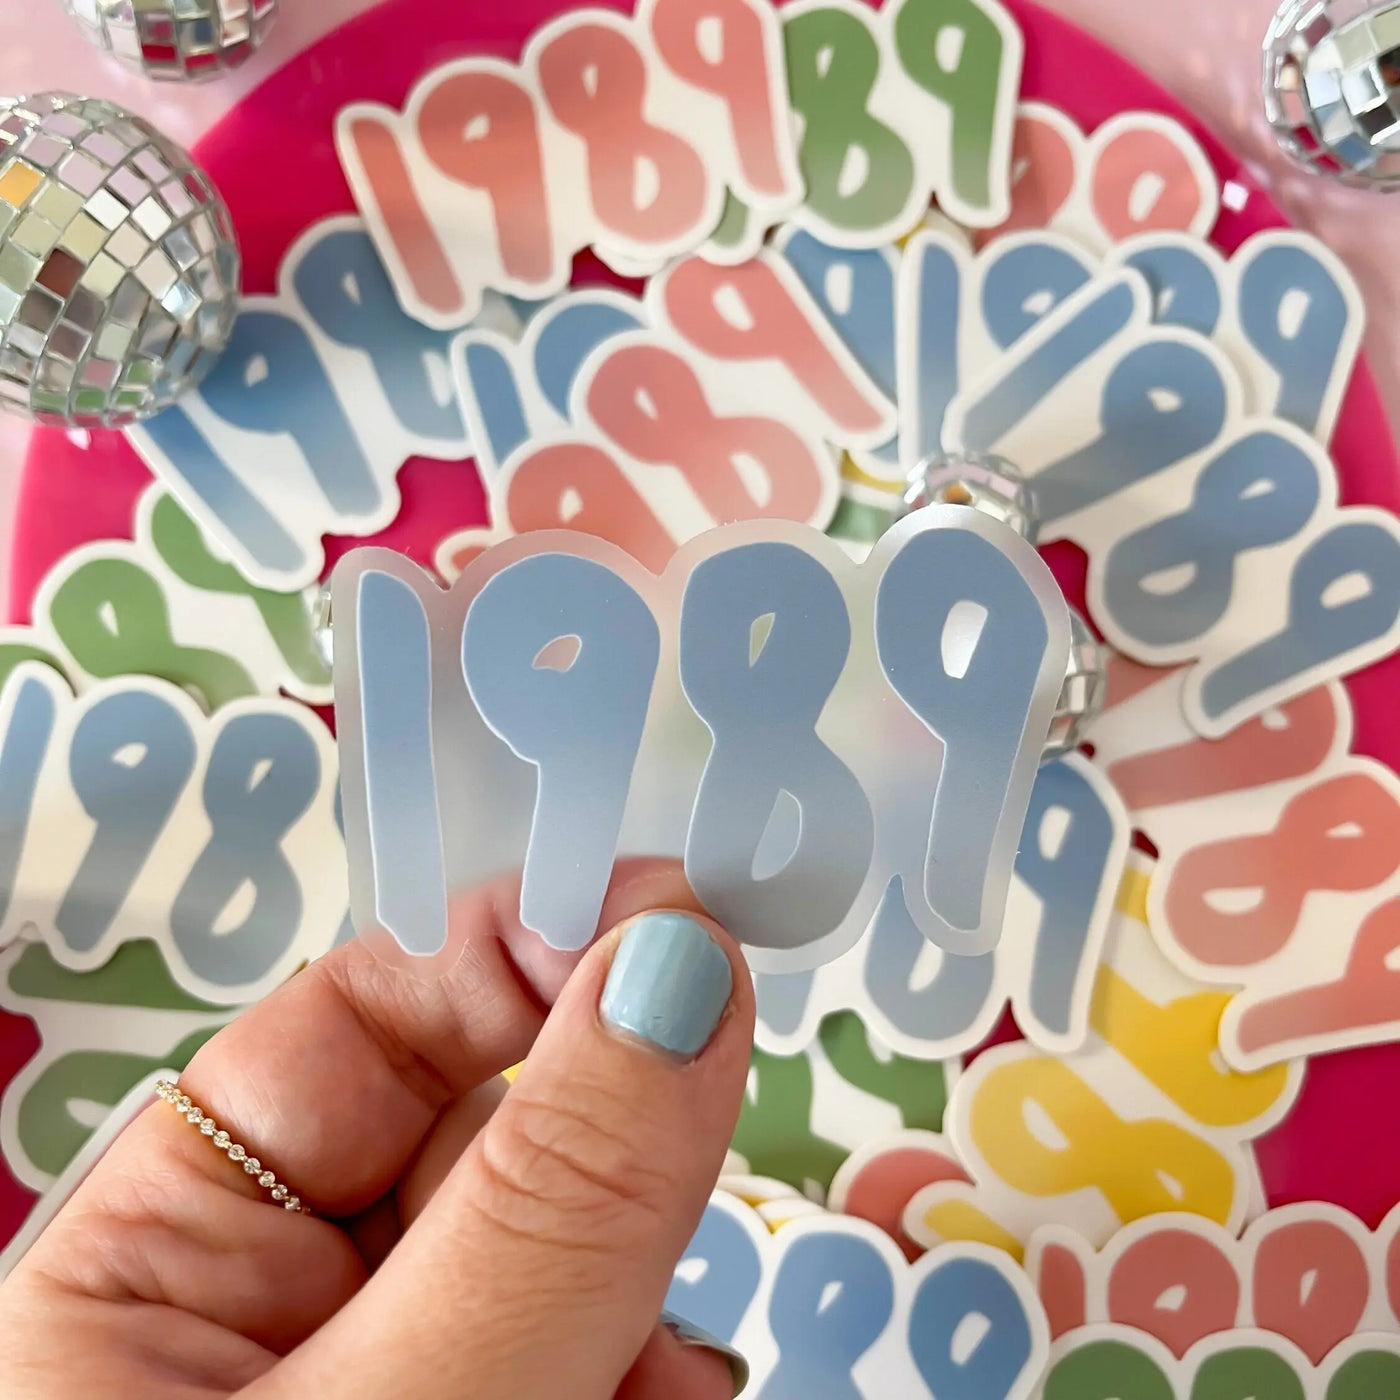 CLEAR 1989 sticker - blue MangoIllustrated